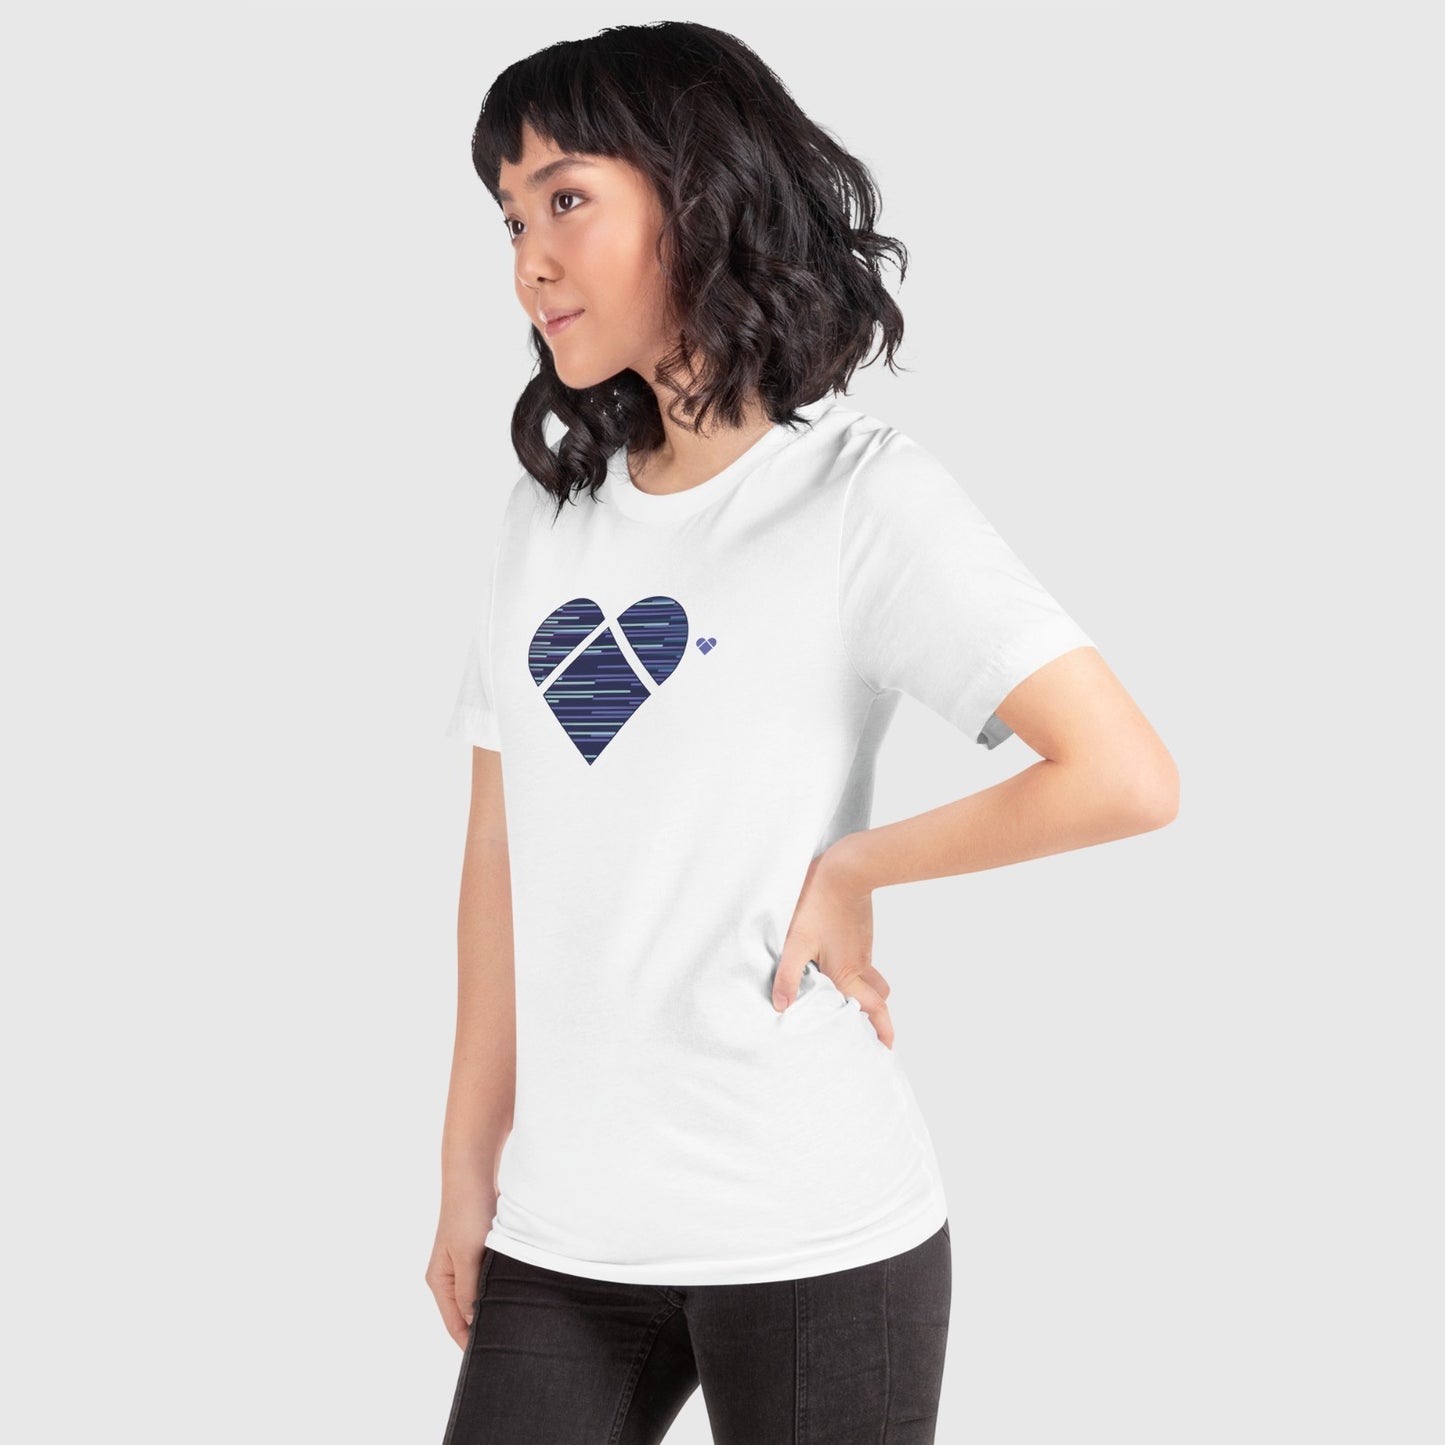 CRiZ AMOR's Amor Dual Collection: White Tee with Hearts